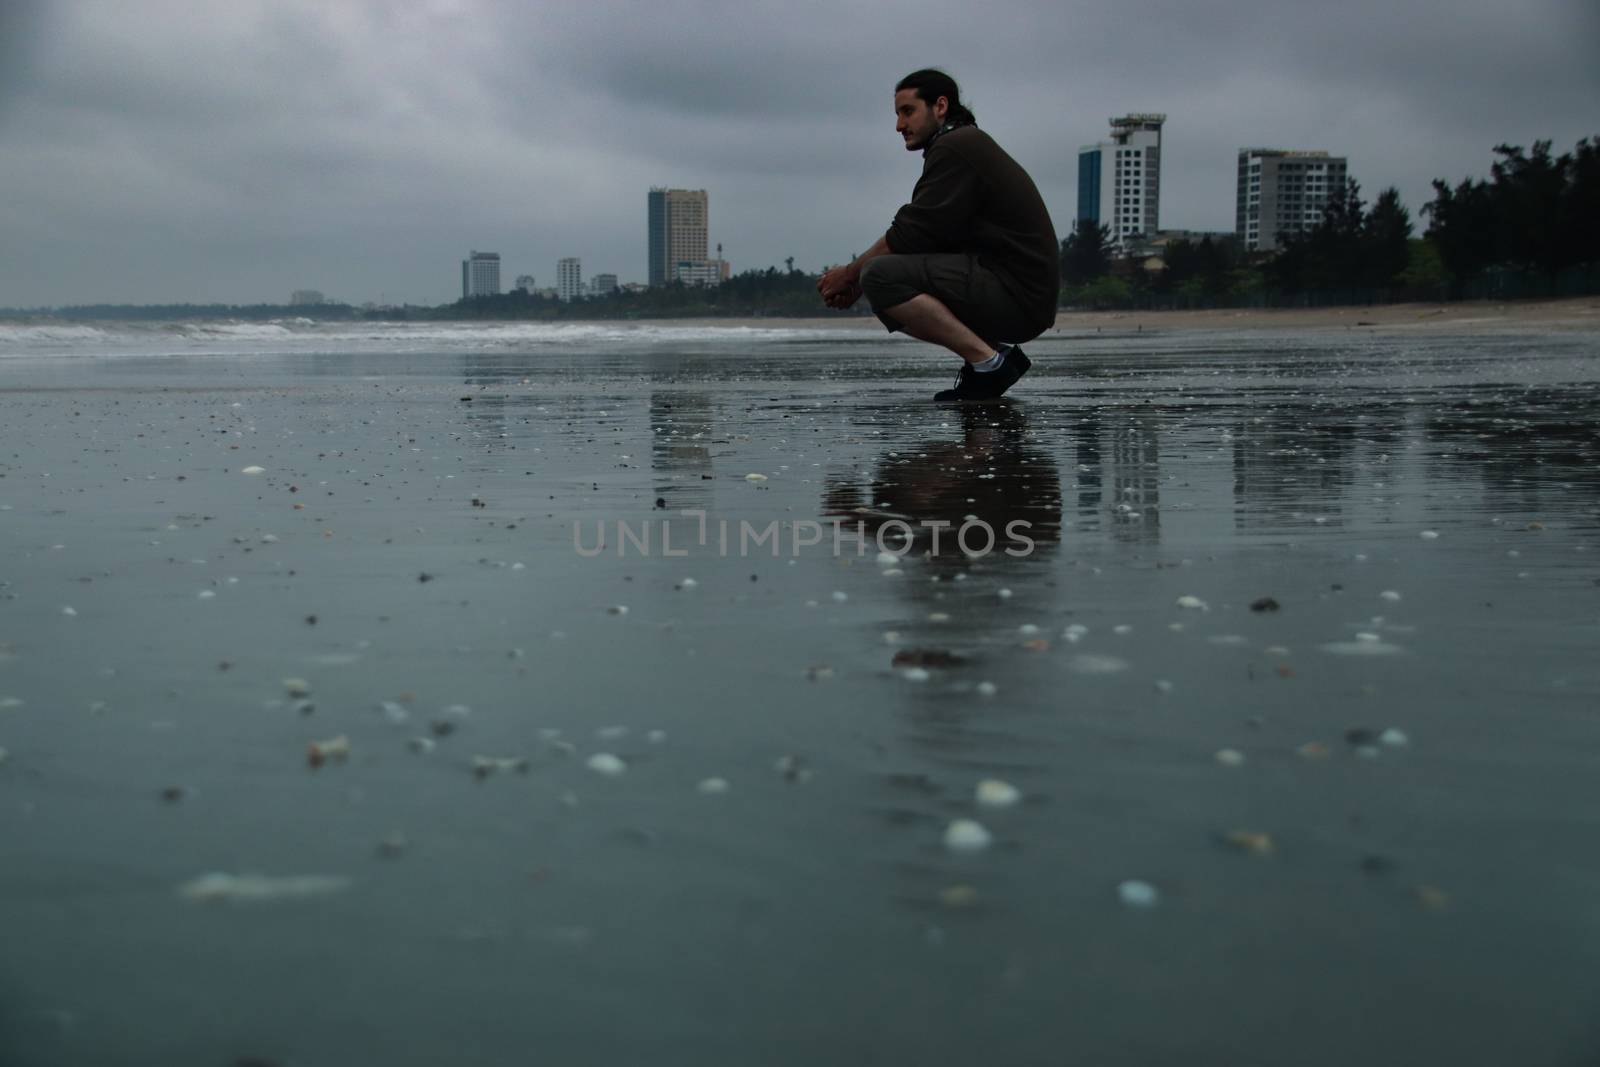 One man looking out into the distance at the shore on a dark gloomy day after a storm